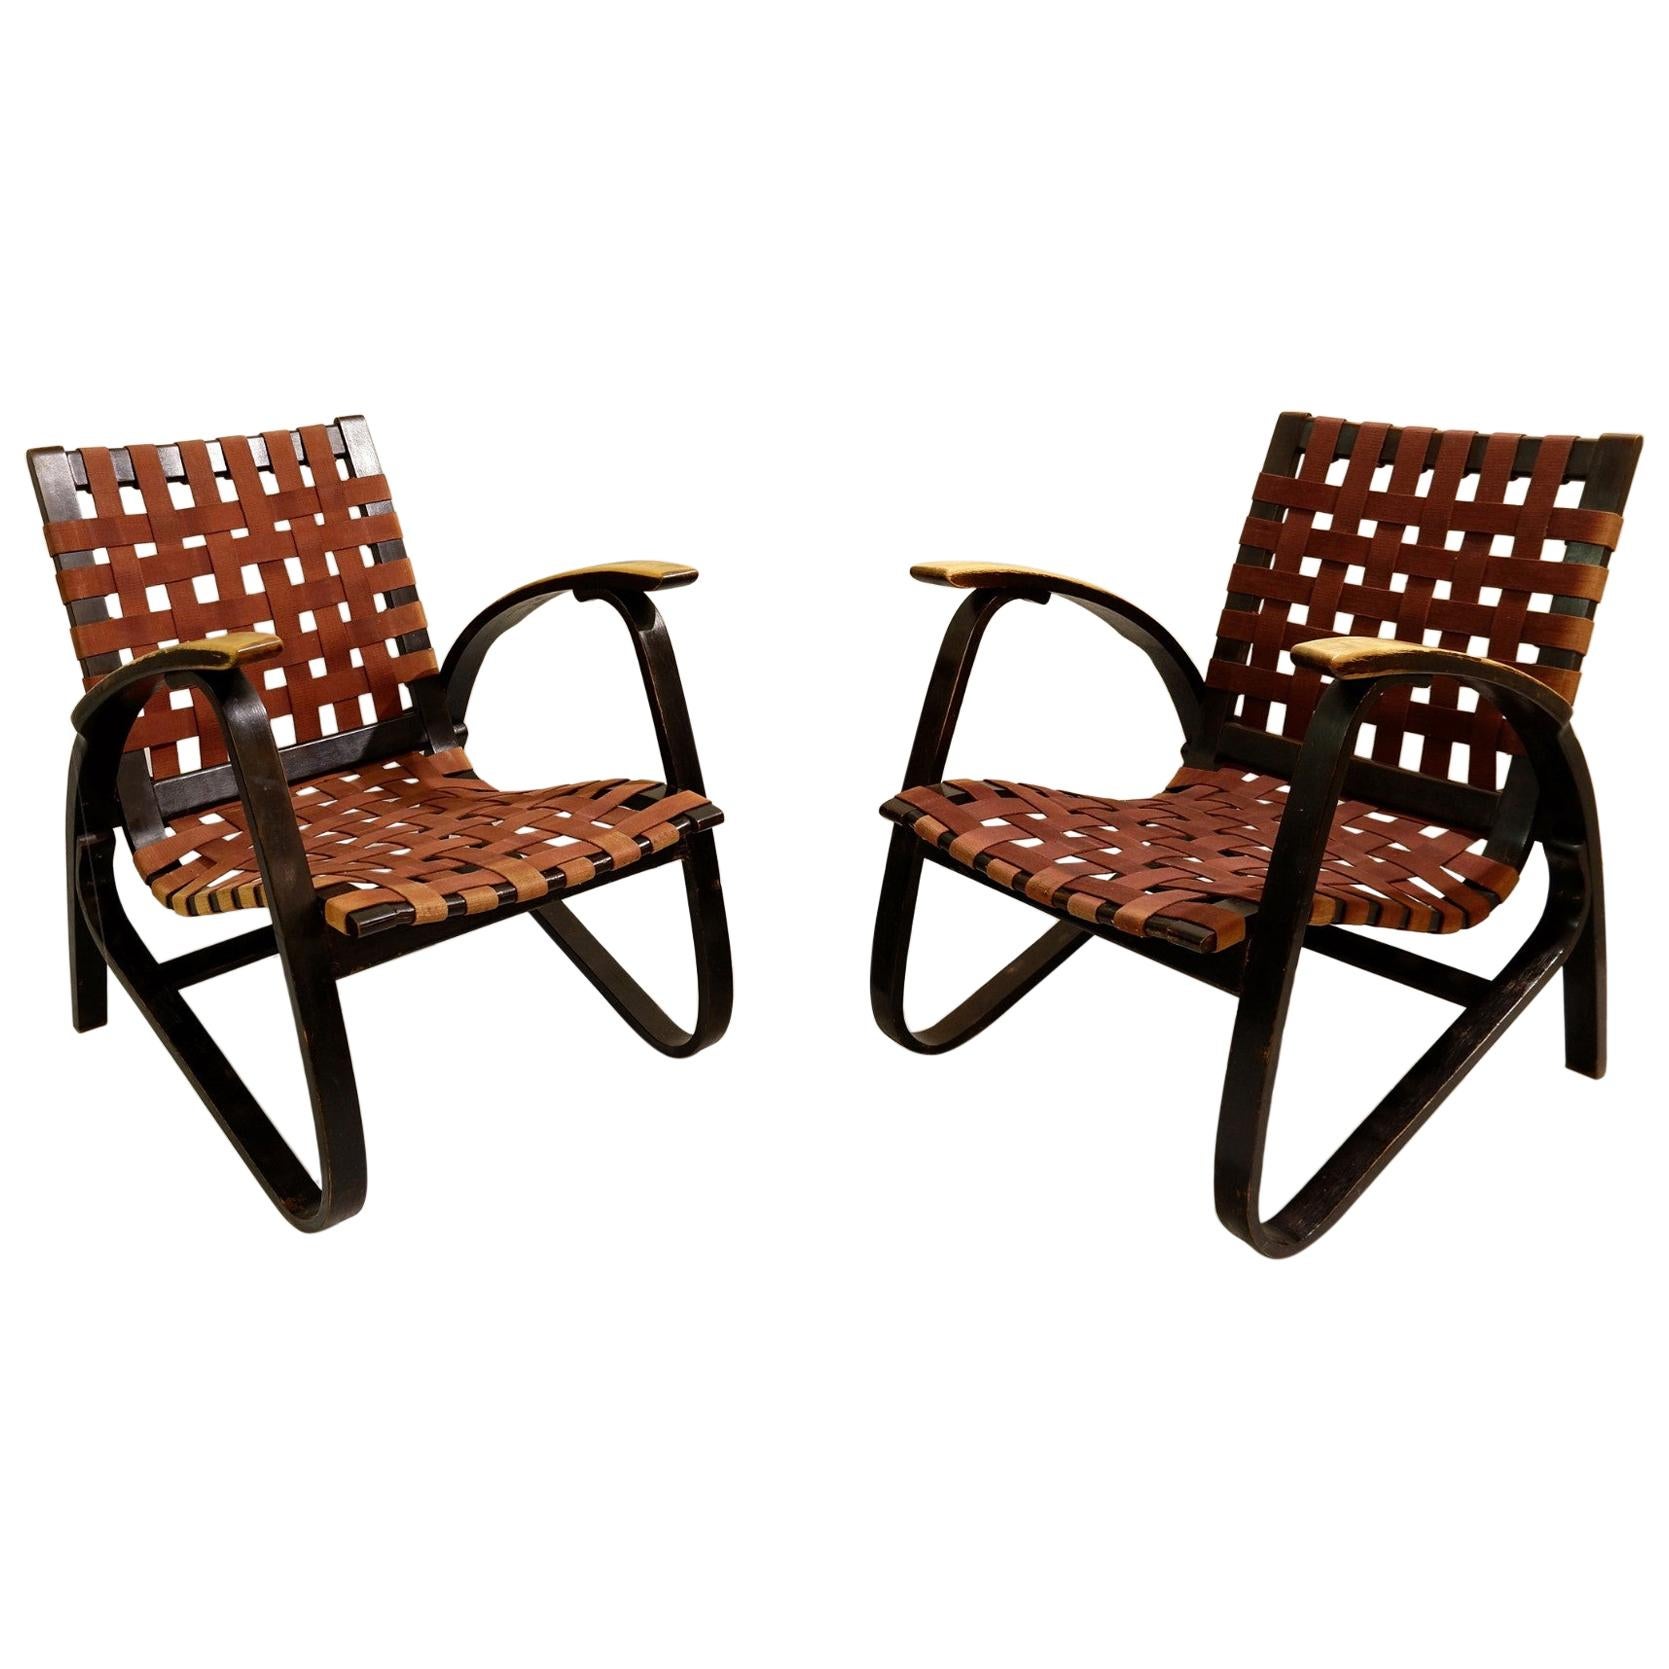 Pair of Bentwood Armchairs by Jan Vanek for UP Závody, 1930s